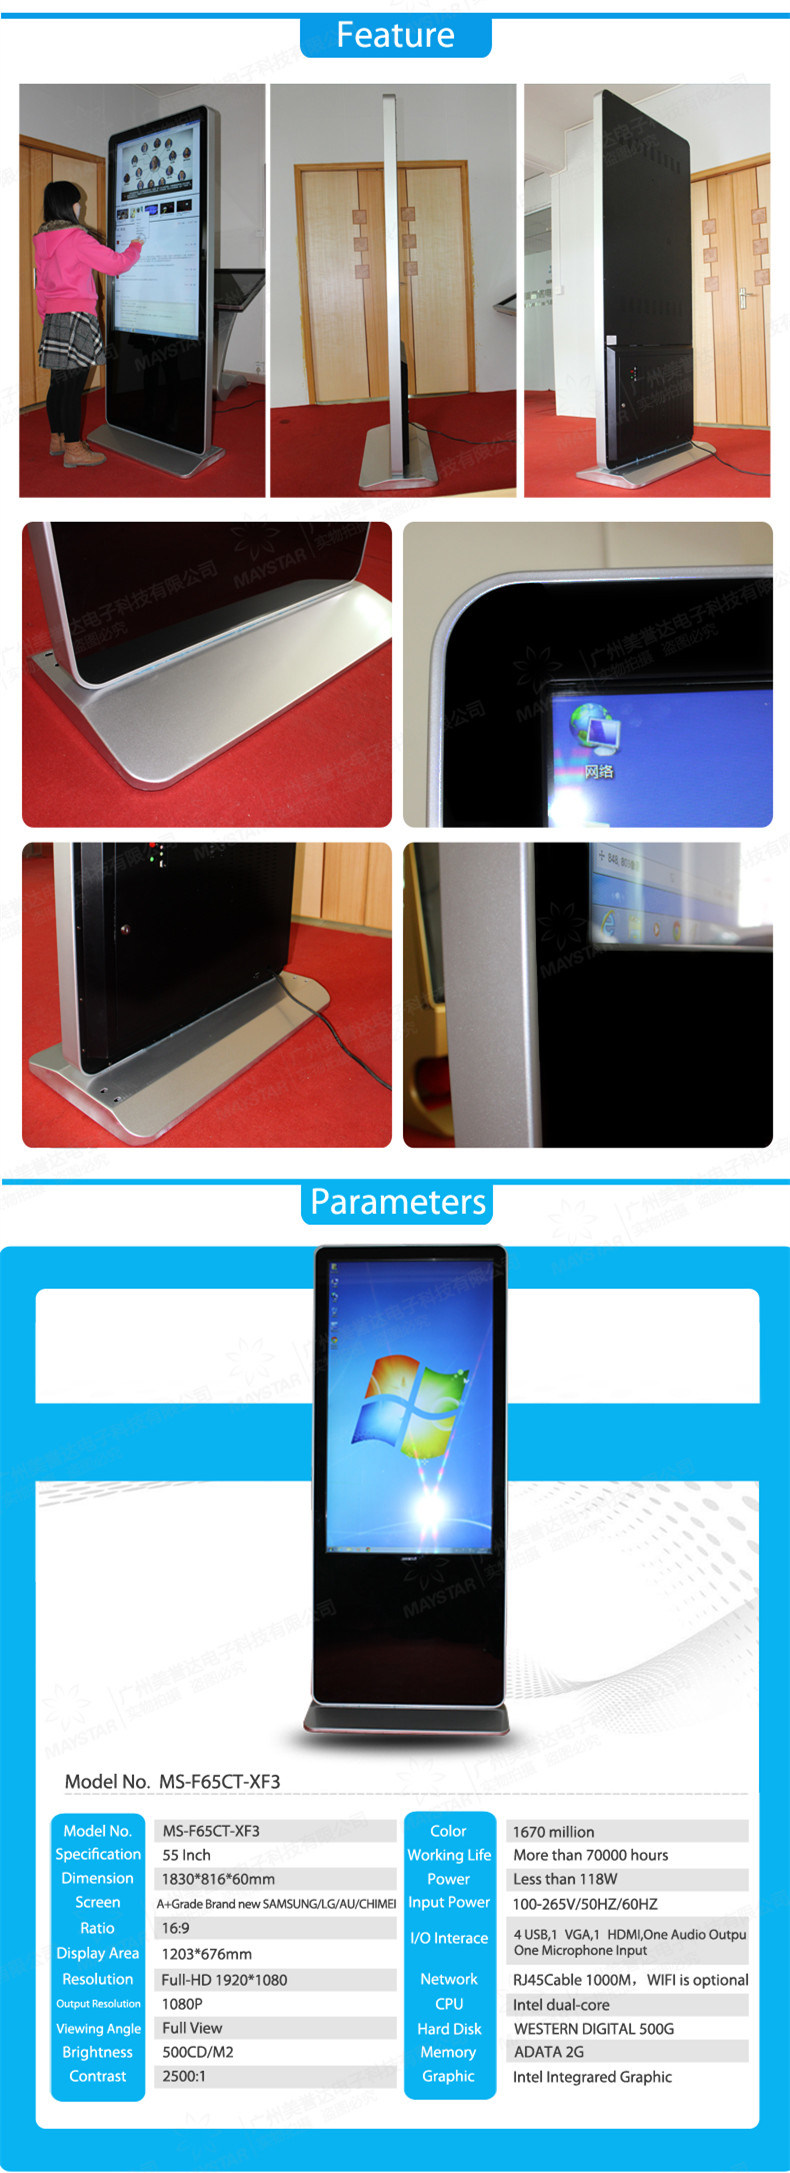 55 Inch Lowest Price 3G WiFi Touch LED Advertising Kiosk